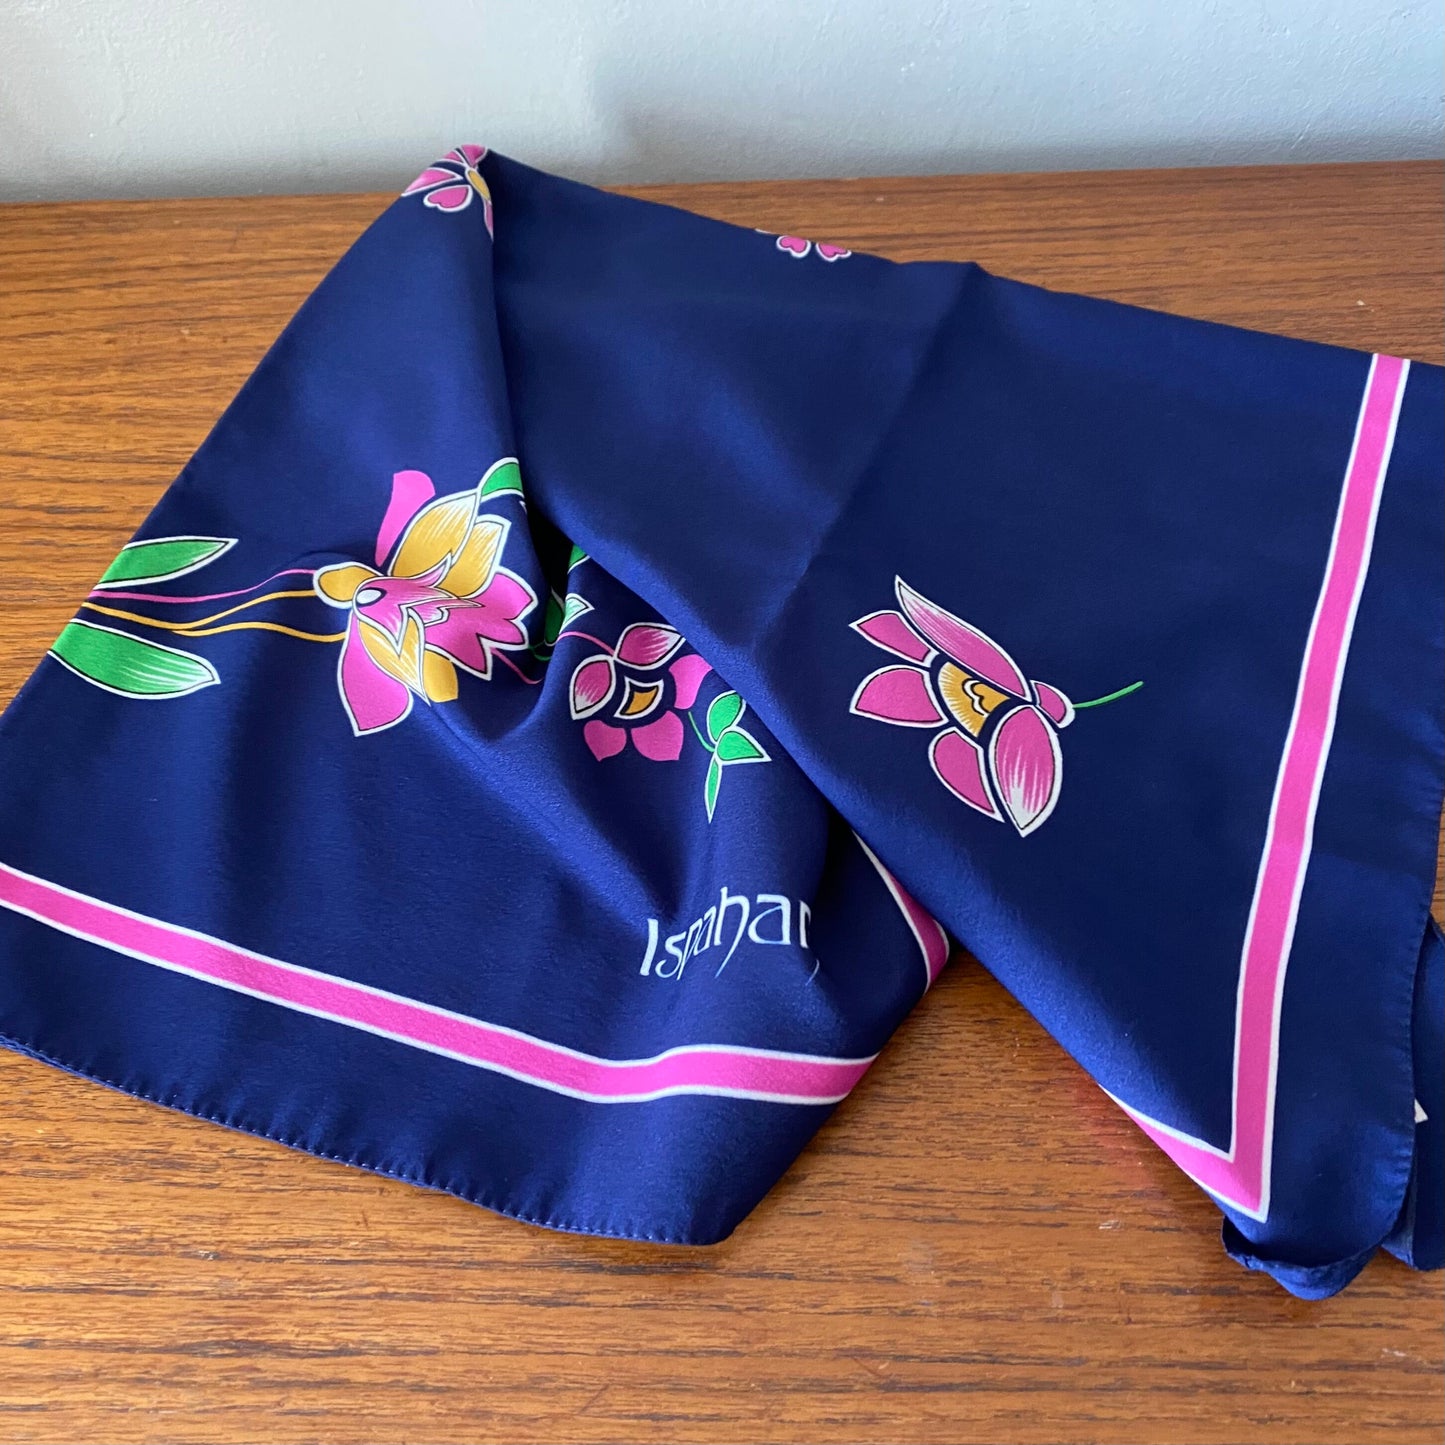 Large vintage floral scarf. Blue with pink flowers and border. Made in Italy. Great gift idea